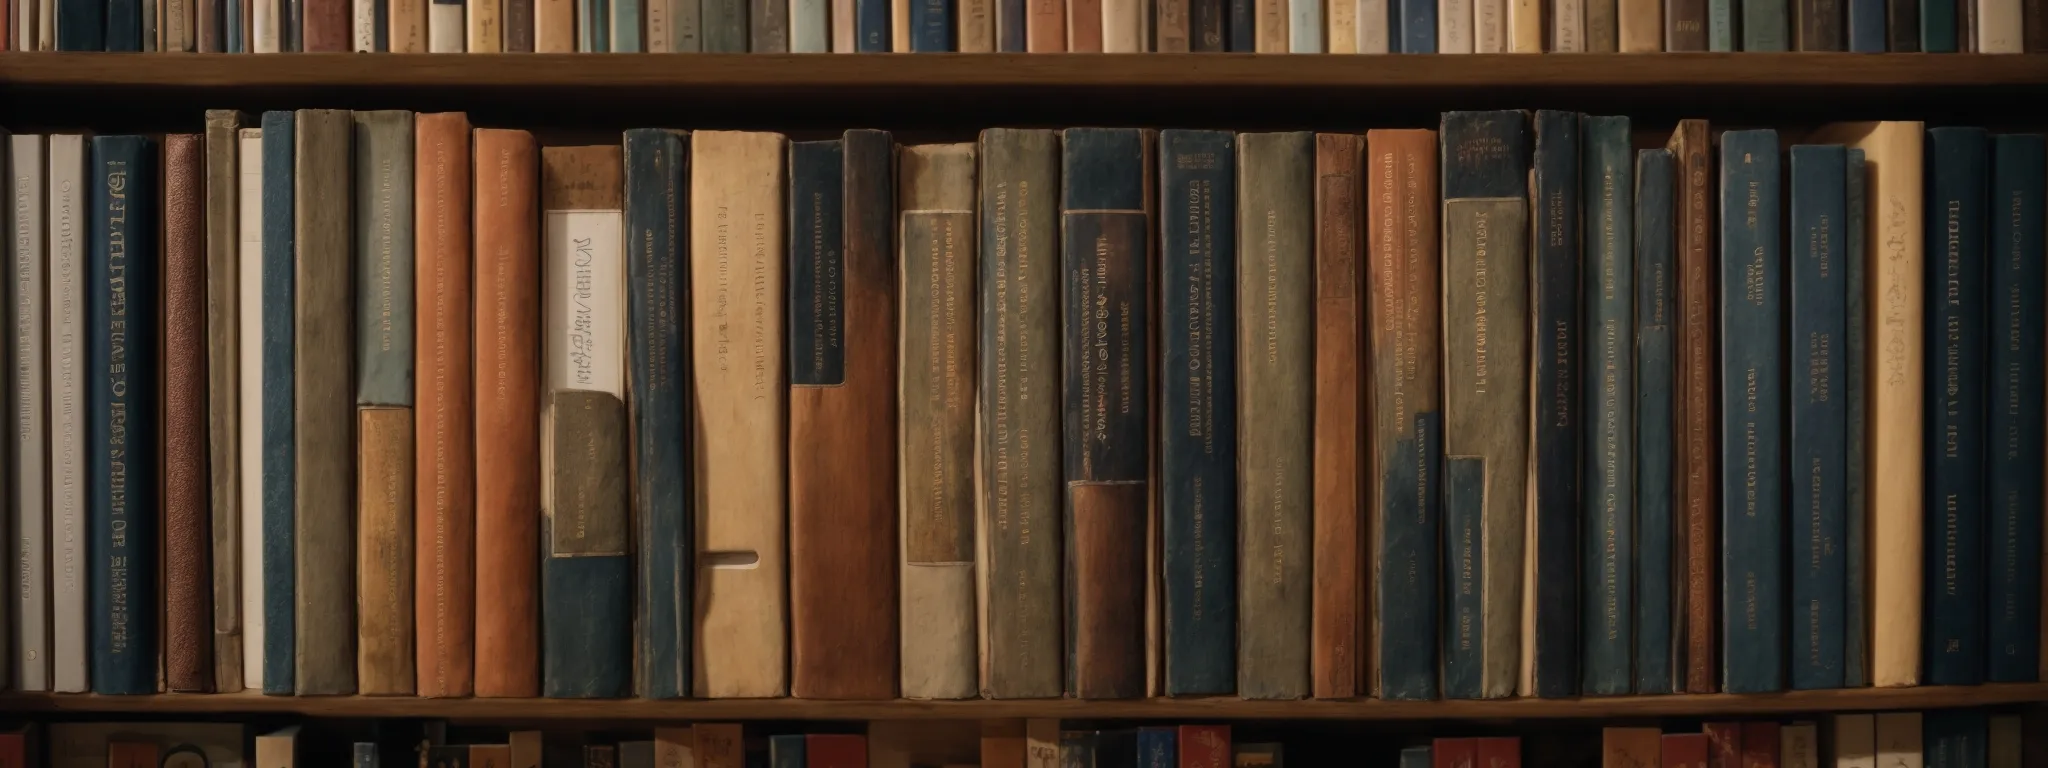 a close-up of a neatly organized bookshelf with multiple bookmarks protruding, representing the structuring and indexing of information.